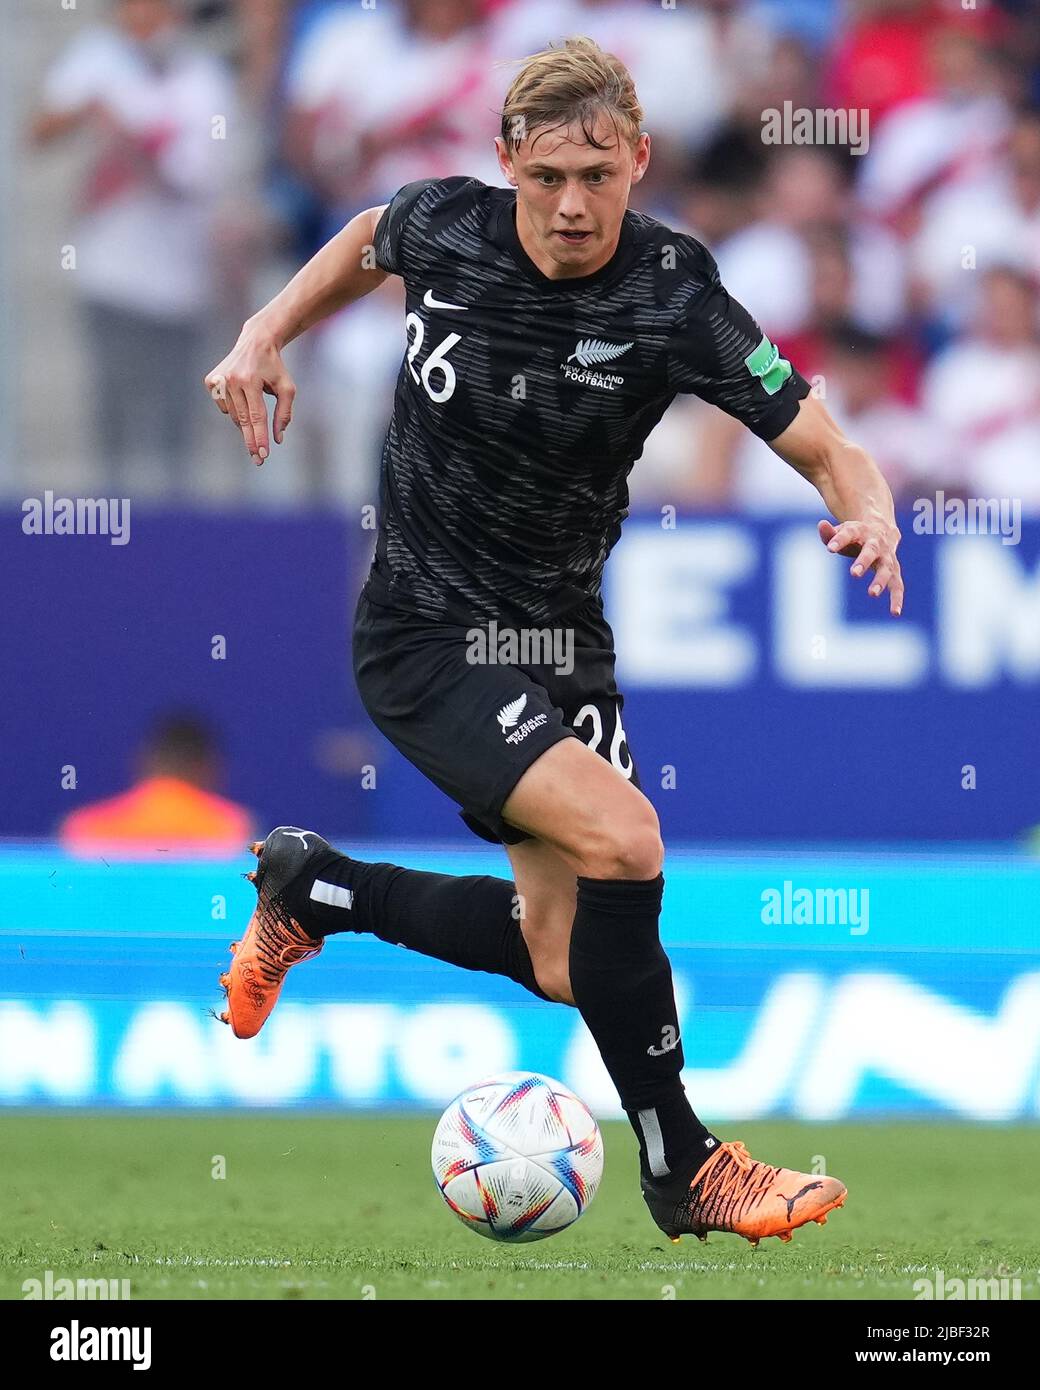 Barcelona, Spain. June 5, 2022, Ben Waine of New Zealand during the friendly match between Peru and New Zealand played at RCDE Stadium on June 5, 2022 in Barcelona, Spain. (Photo by Bagu Blanco / PRESSINPHOTO) Stock Photo